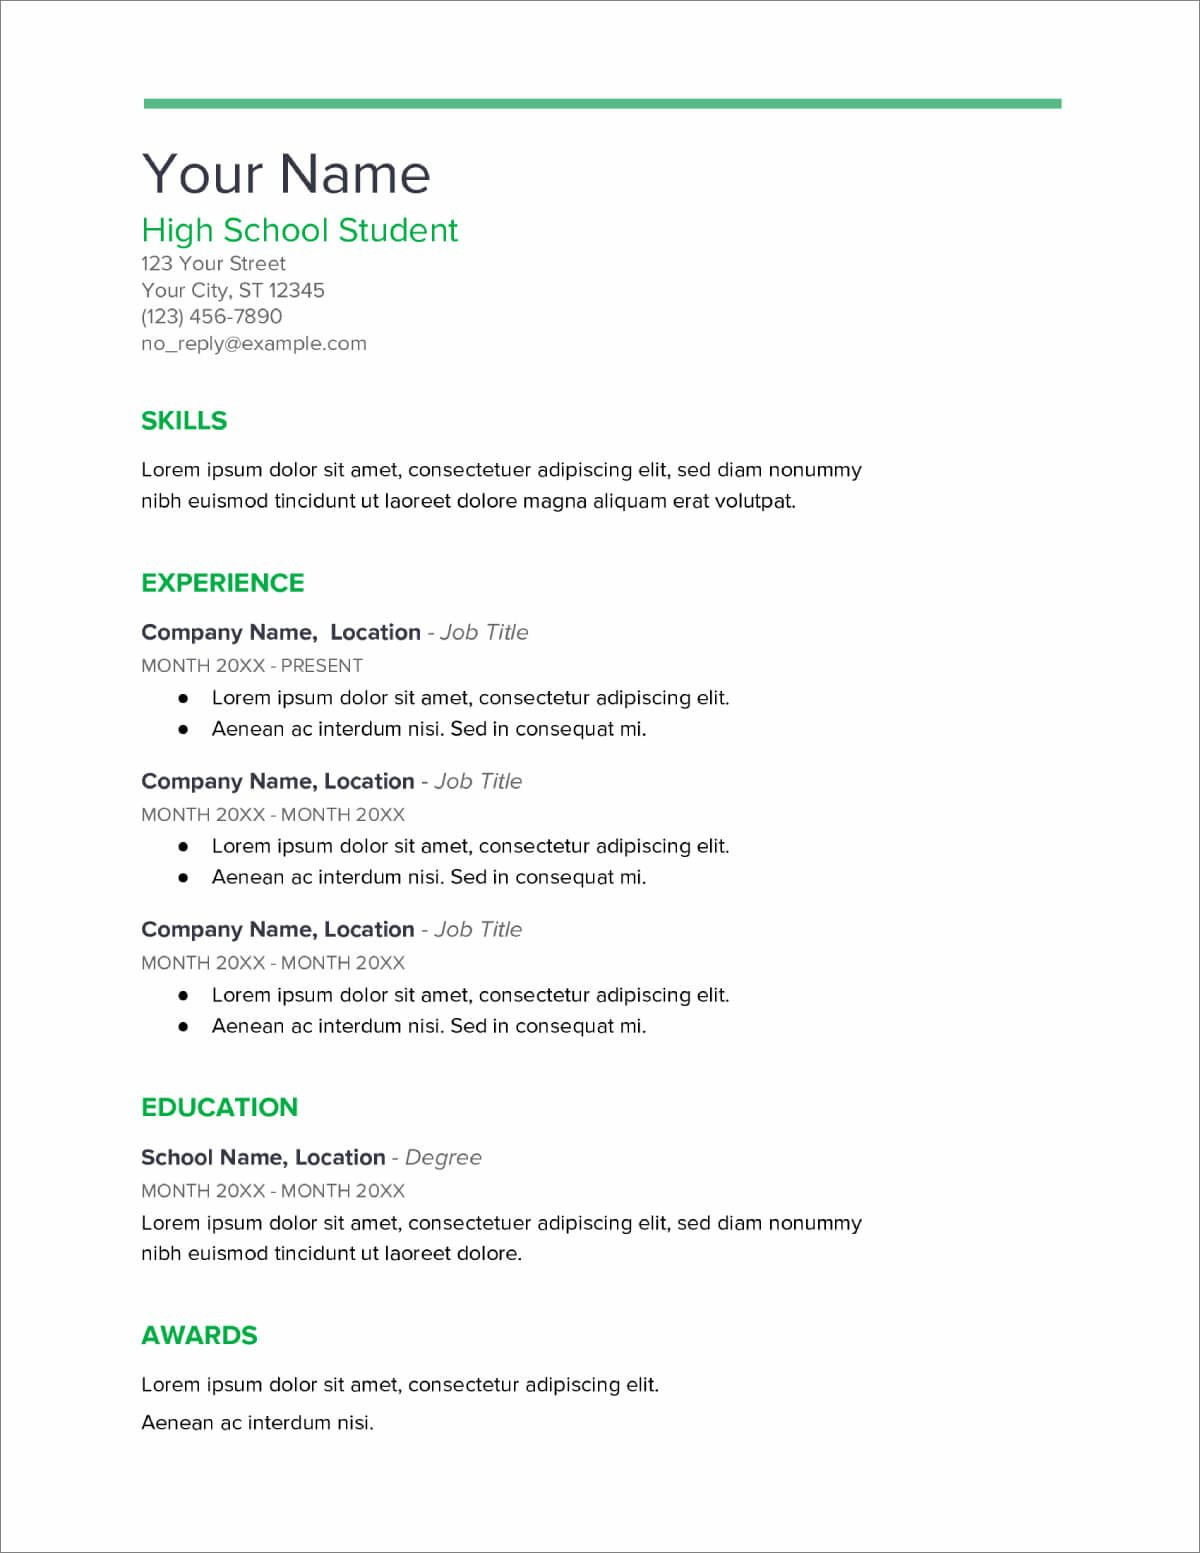 College Resume Template for High School Seniors 20lancarrezekiq High School Resume Templates [download now]